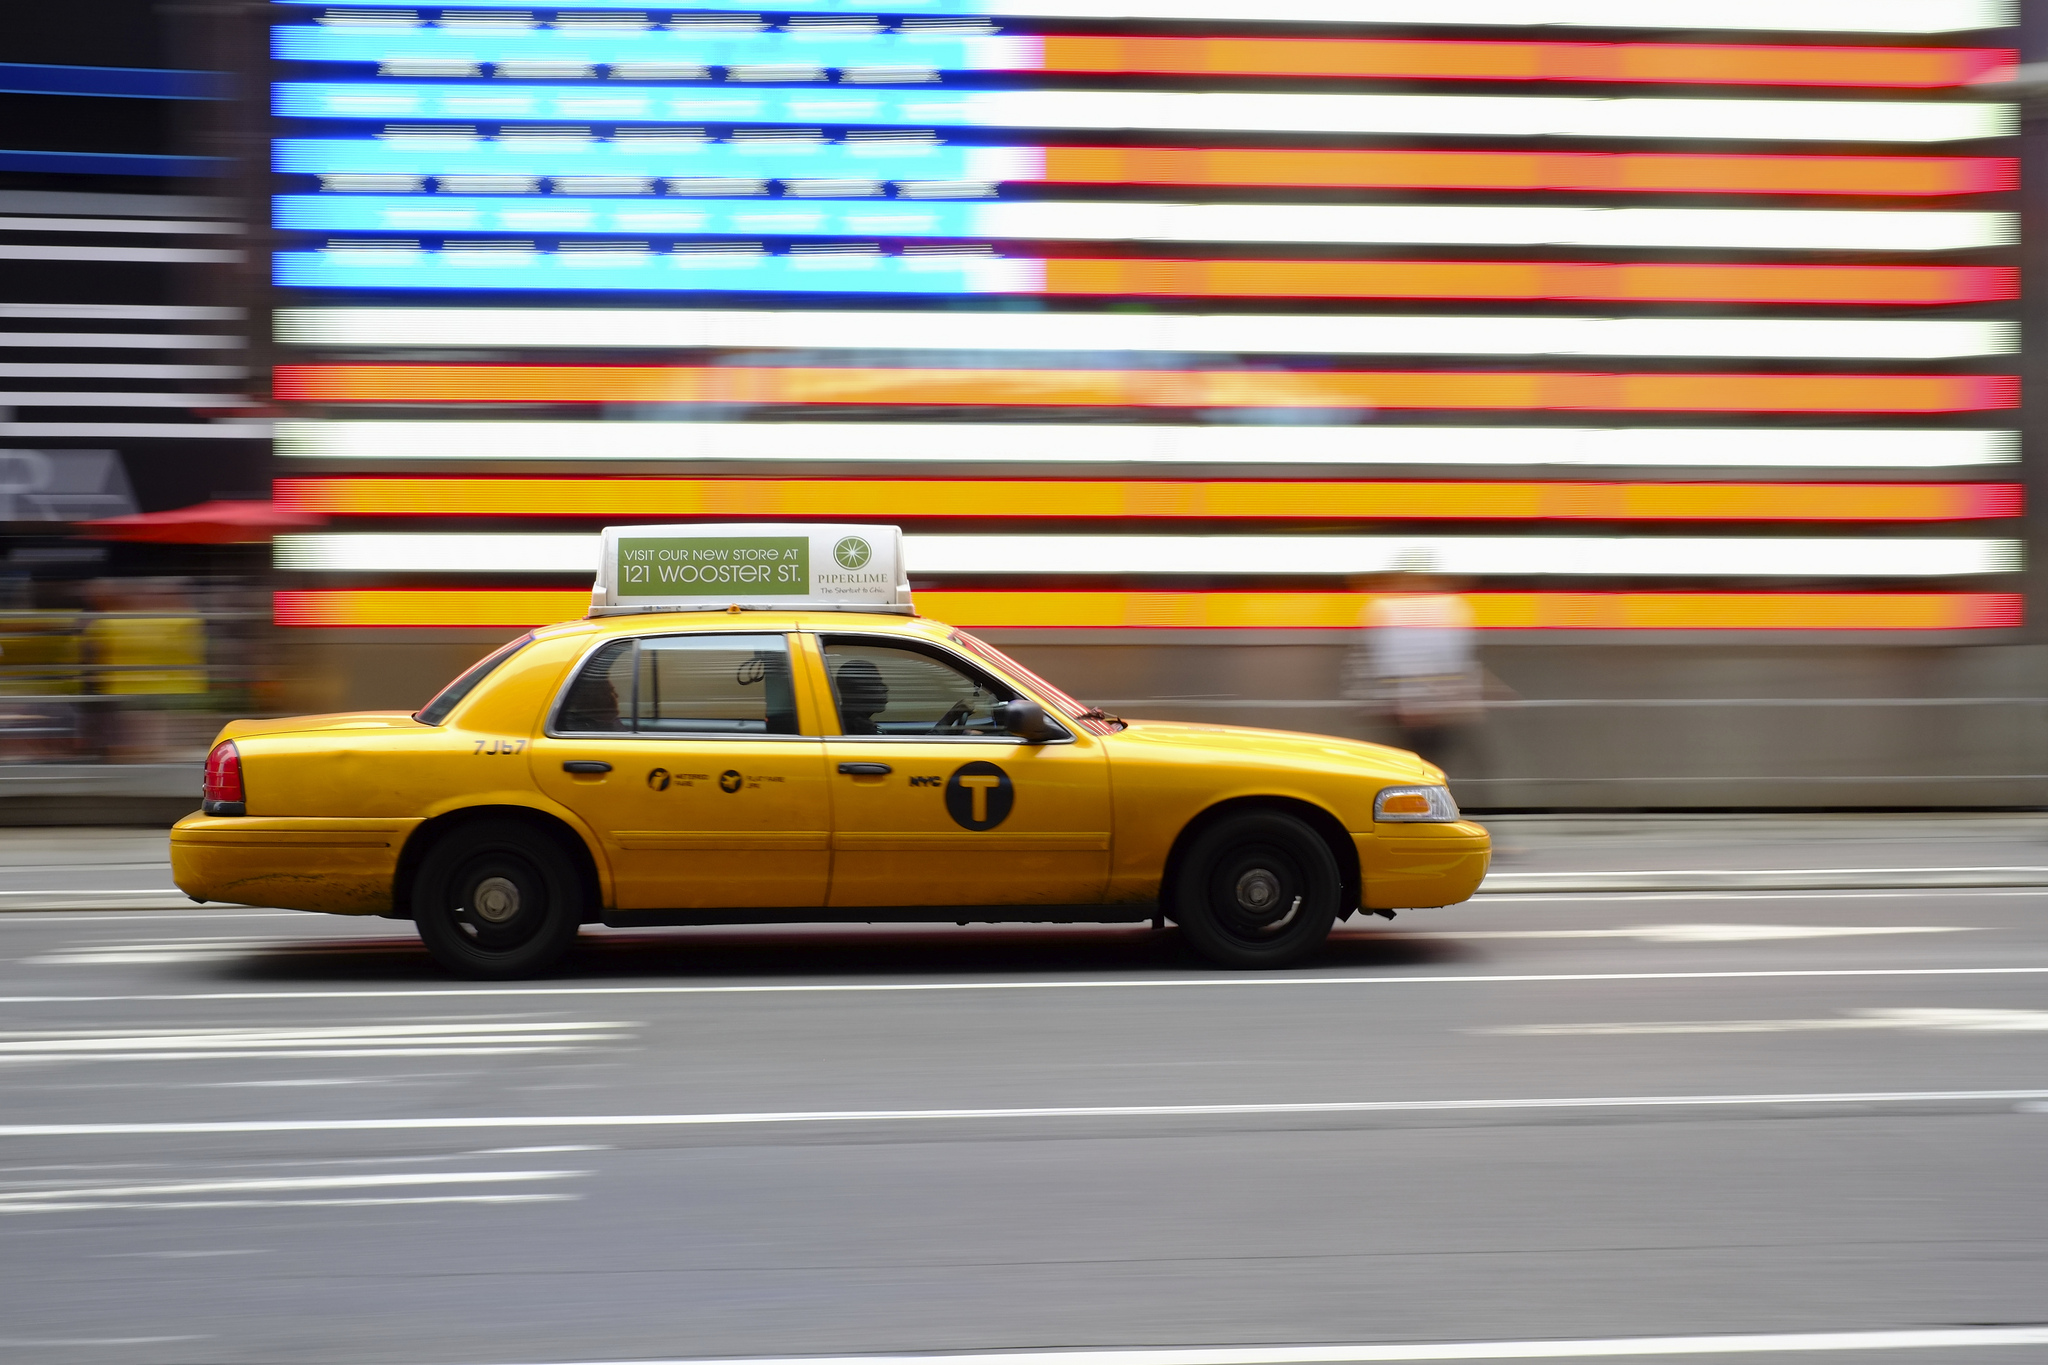 Yellow Taxi in NYC and a US flag in the background